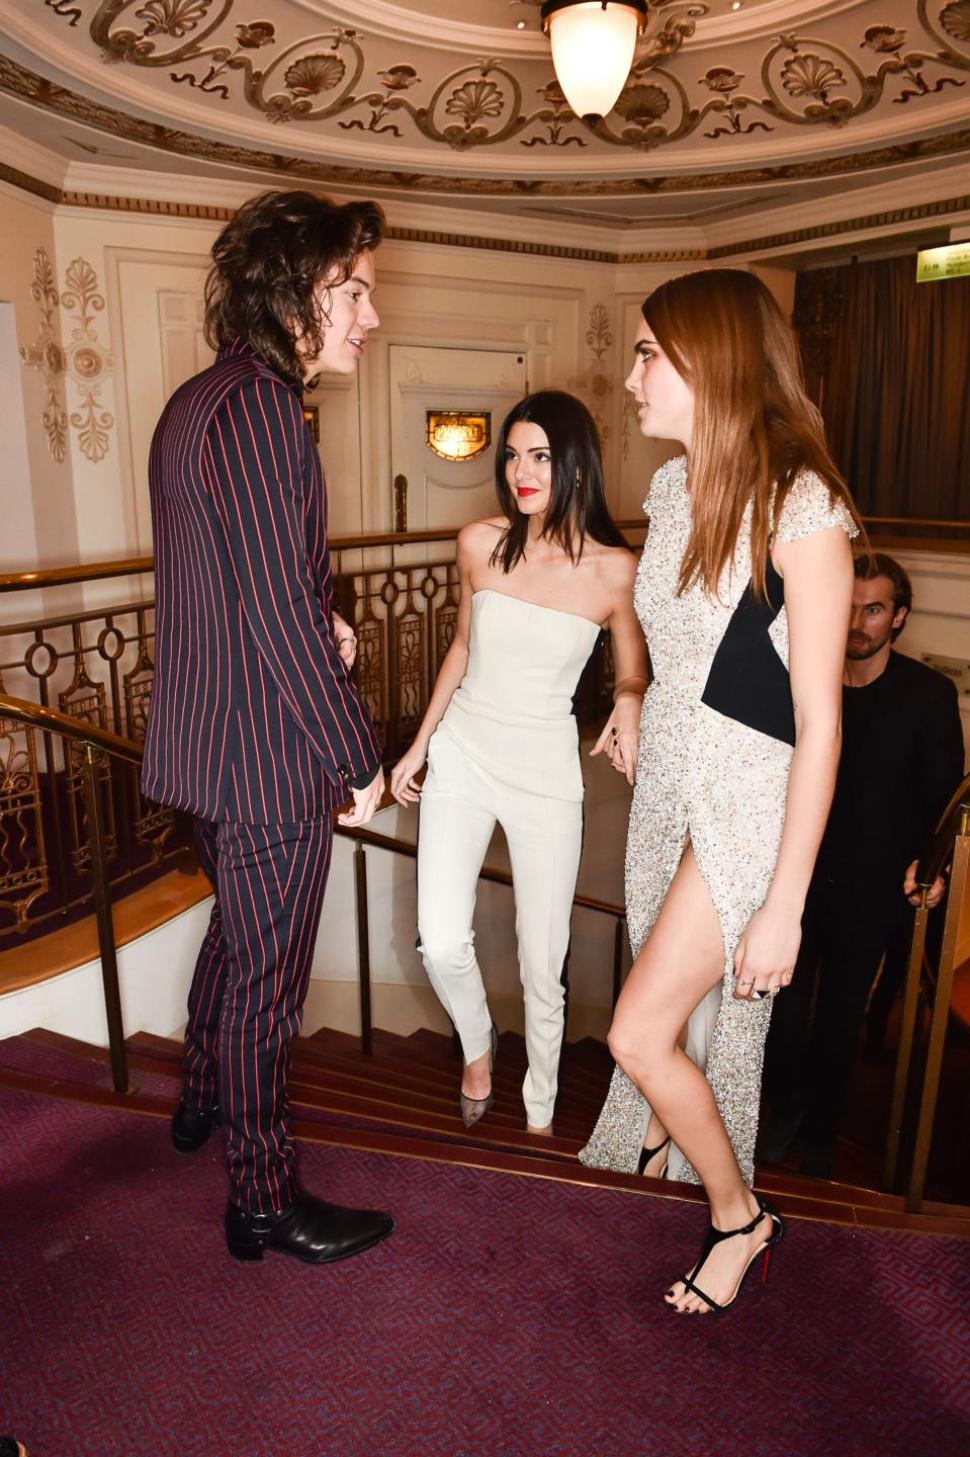 Harry Styles was photographed running into his rumored ex flames Kendall Jenner and Cara Delevingne at Monday's British Fashion Awards.